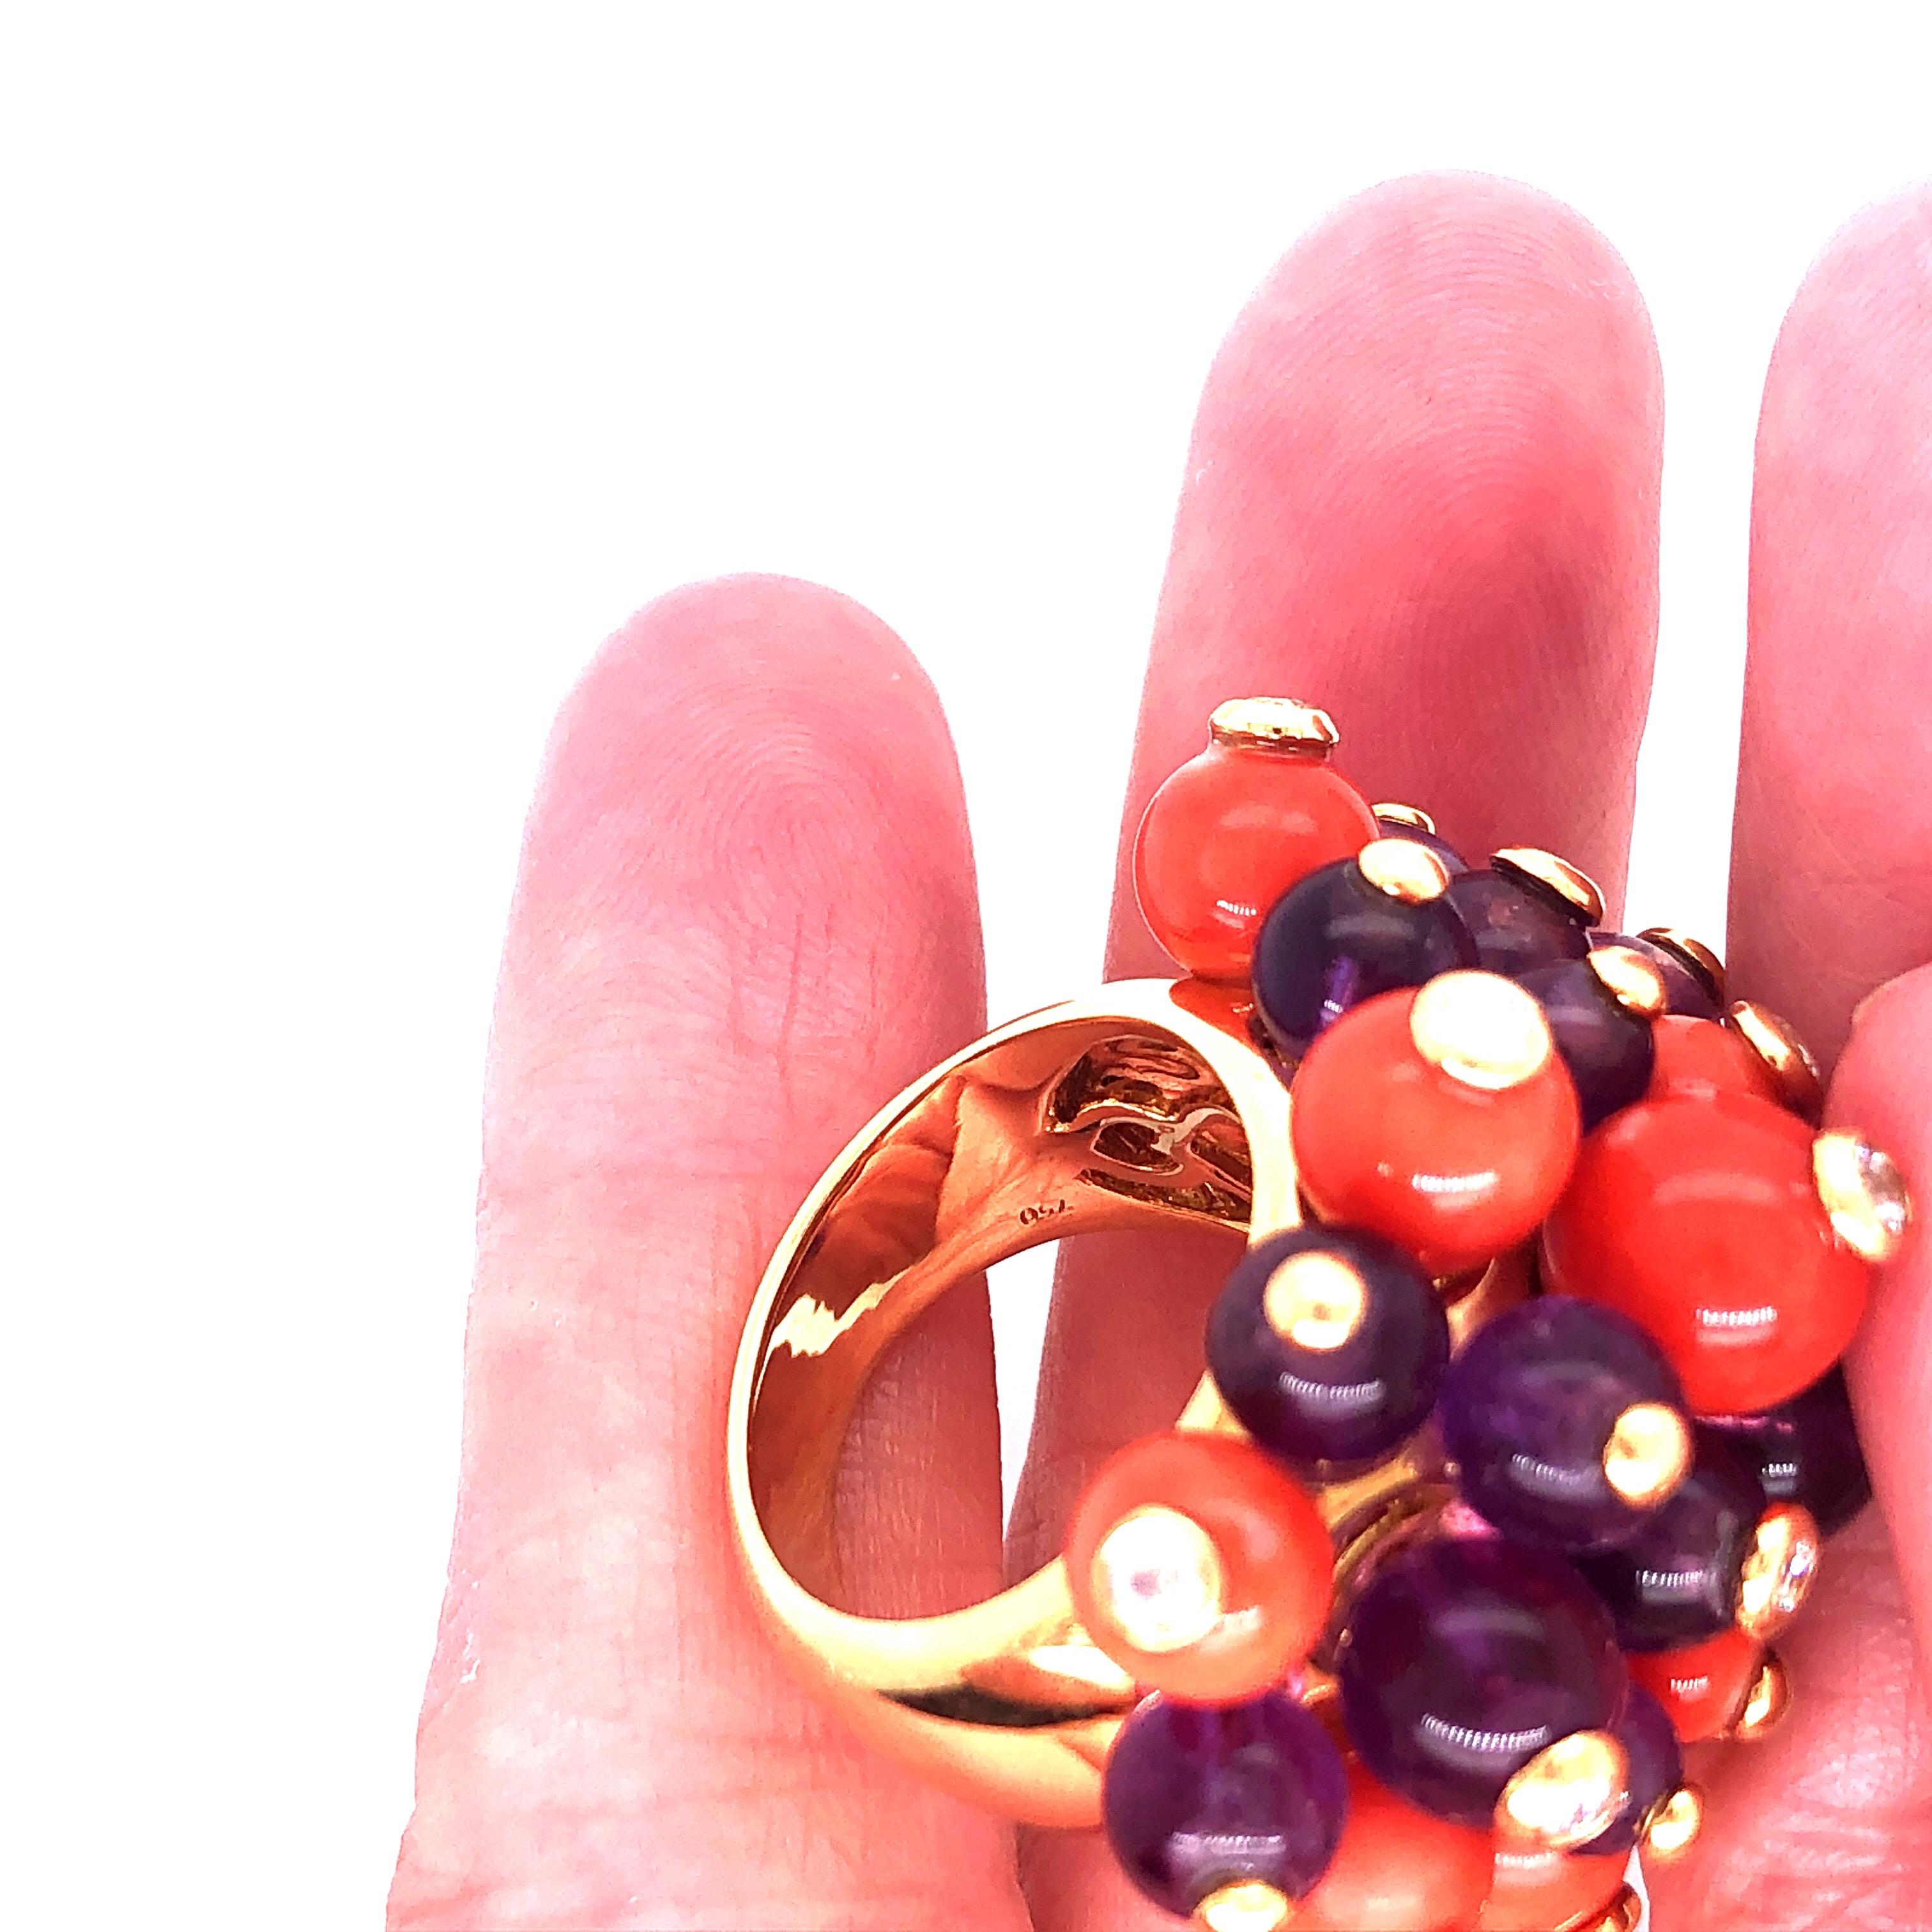 18K Yellow Gold Coral and Amethyst Bead Ring with Diamonds.  A fun, frolicking piece with true beauty and craftsmanship.  This ring is size 6.6 and stamped 750.